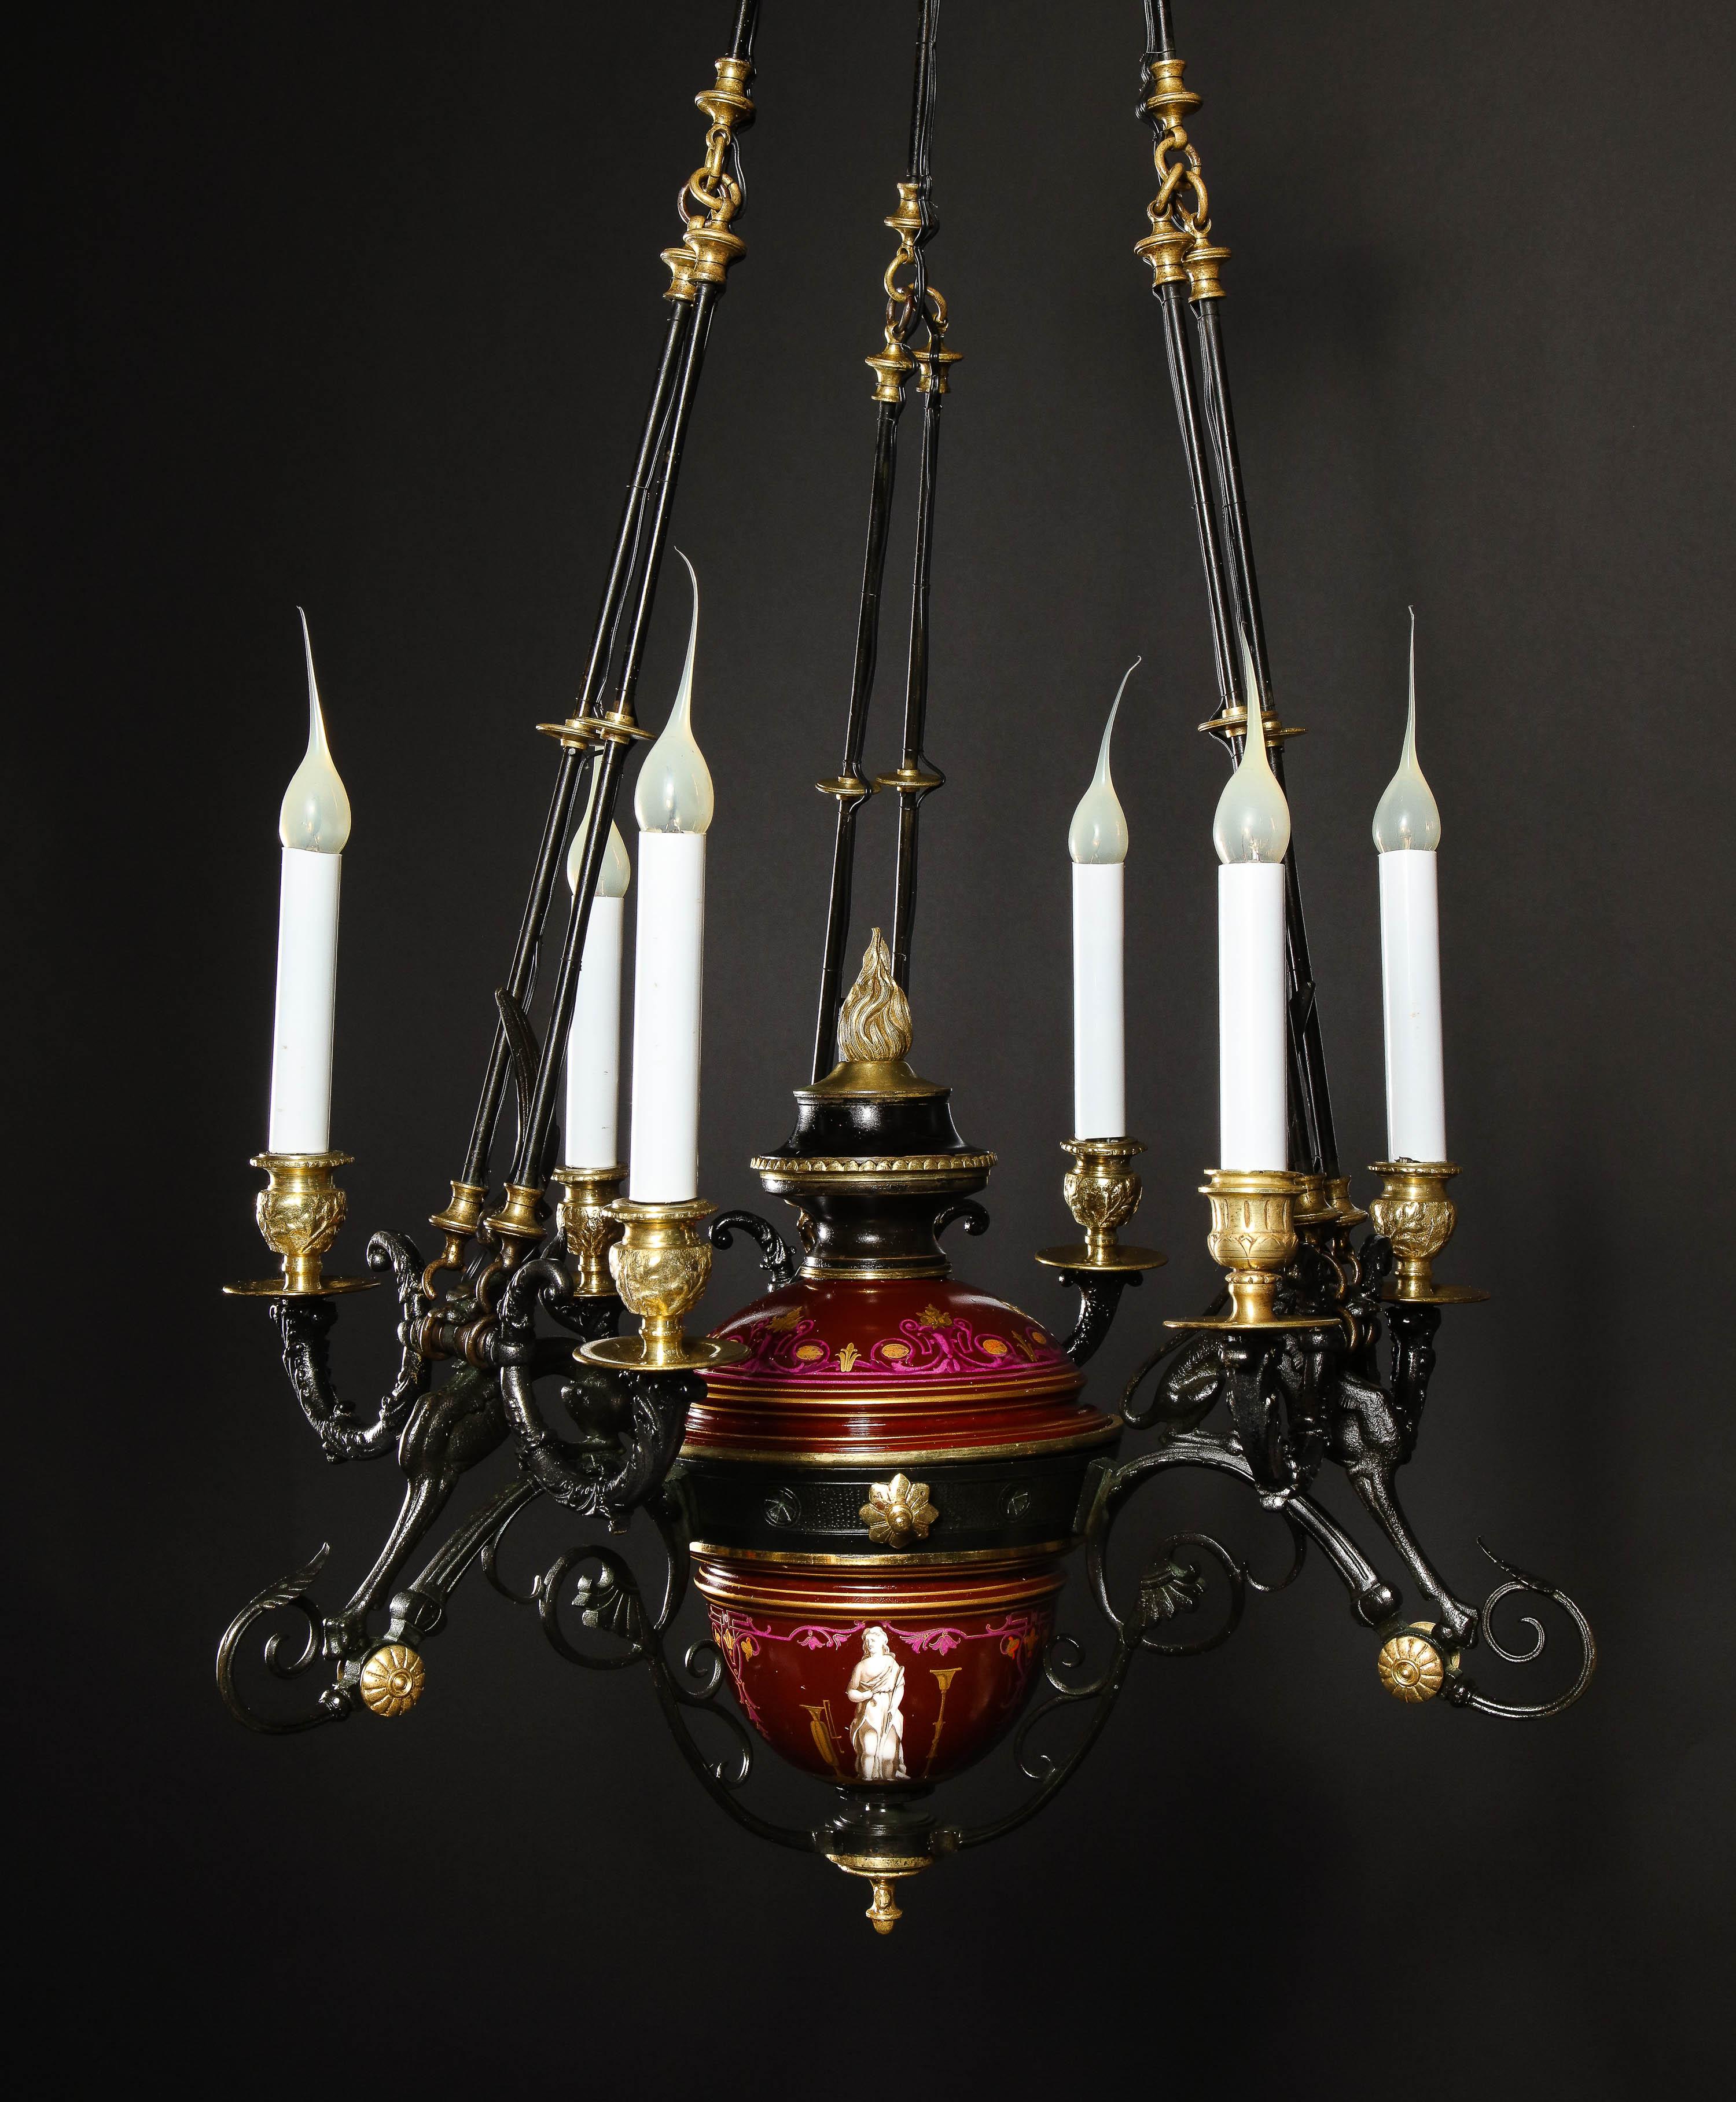 20th Century Hollywood Regency Style Gilt Bronze and Red Porcelain Figural Chandelier For Sale